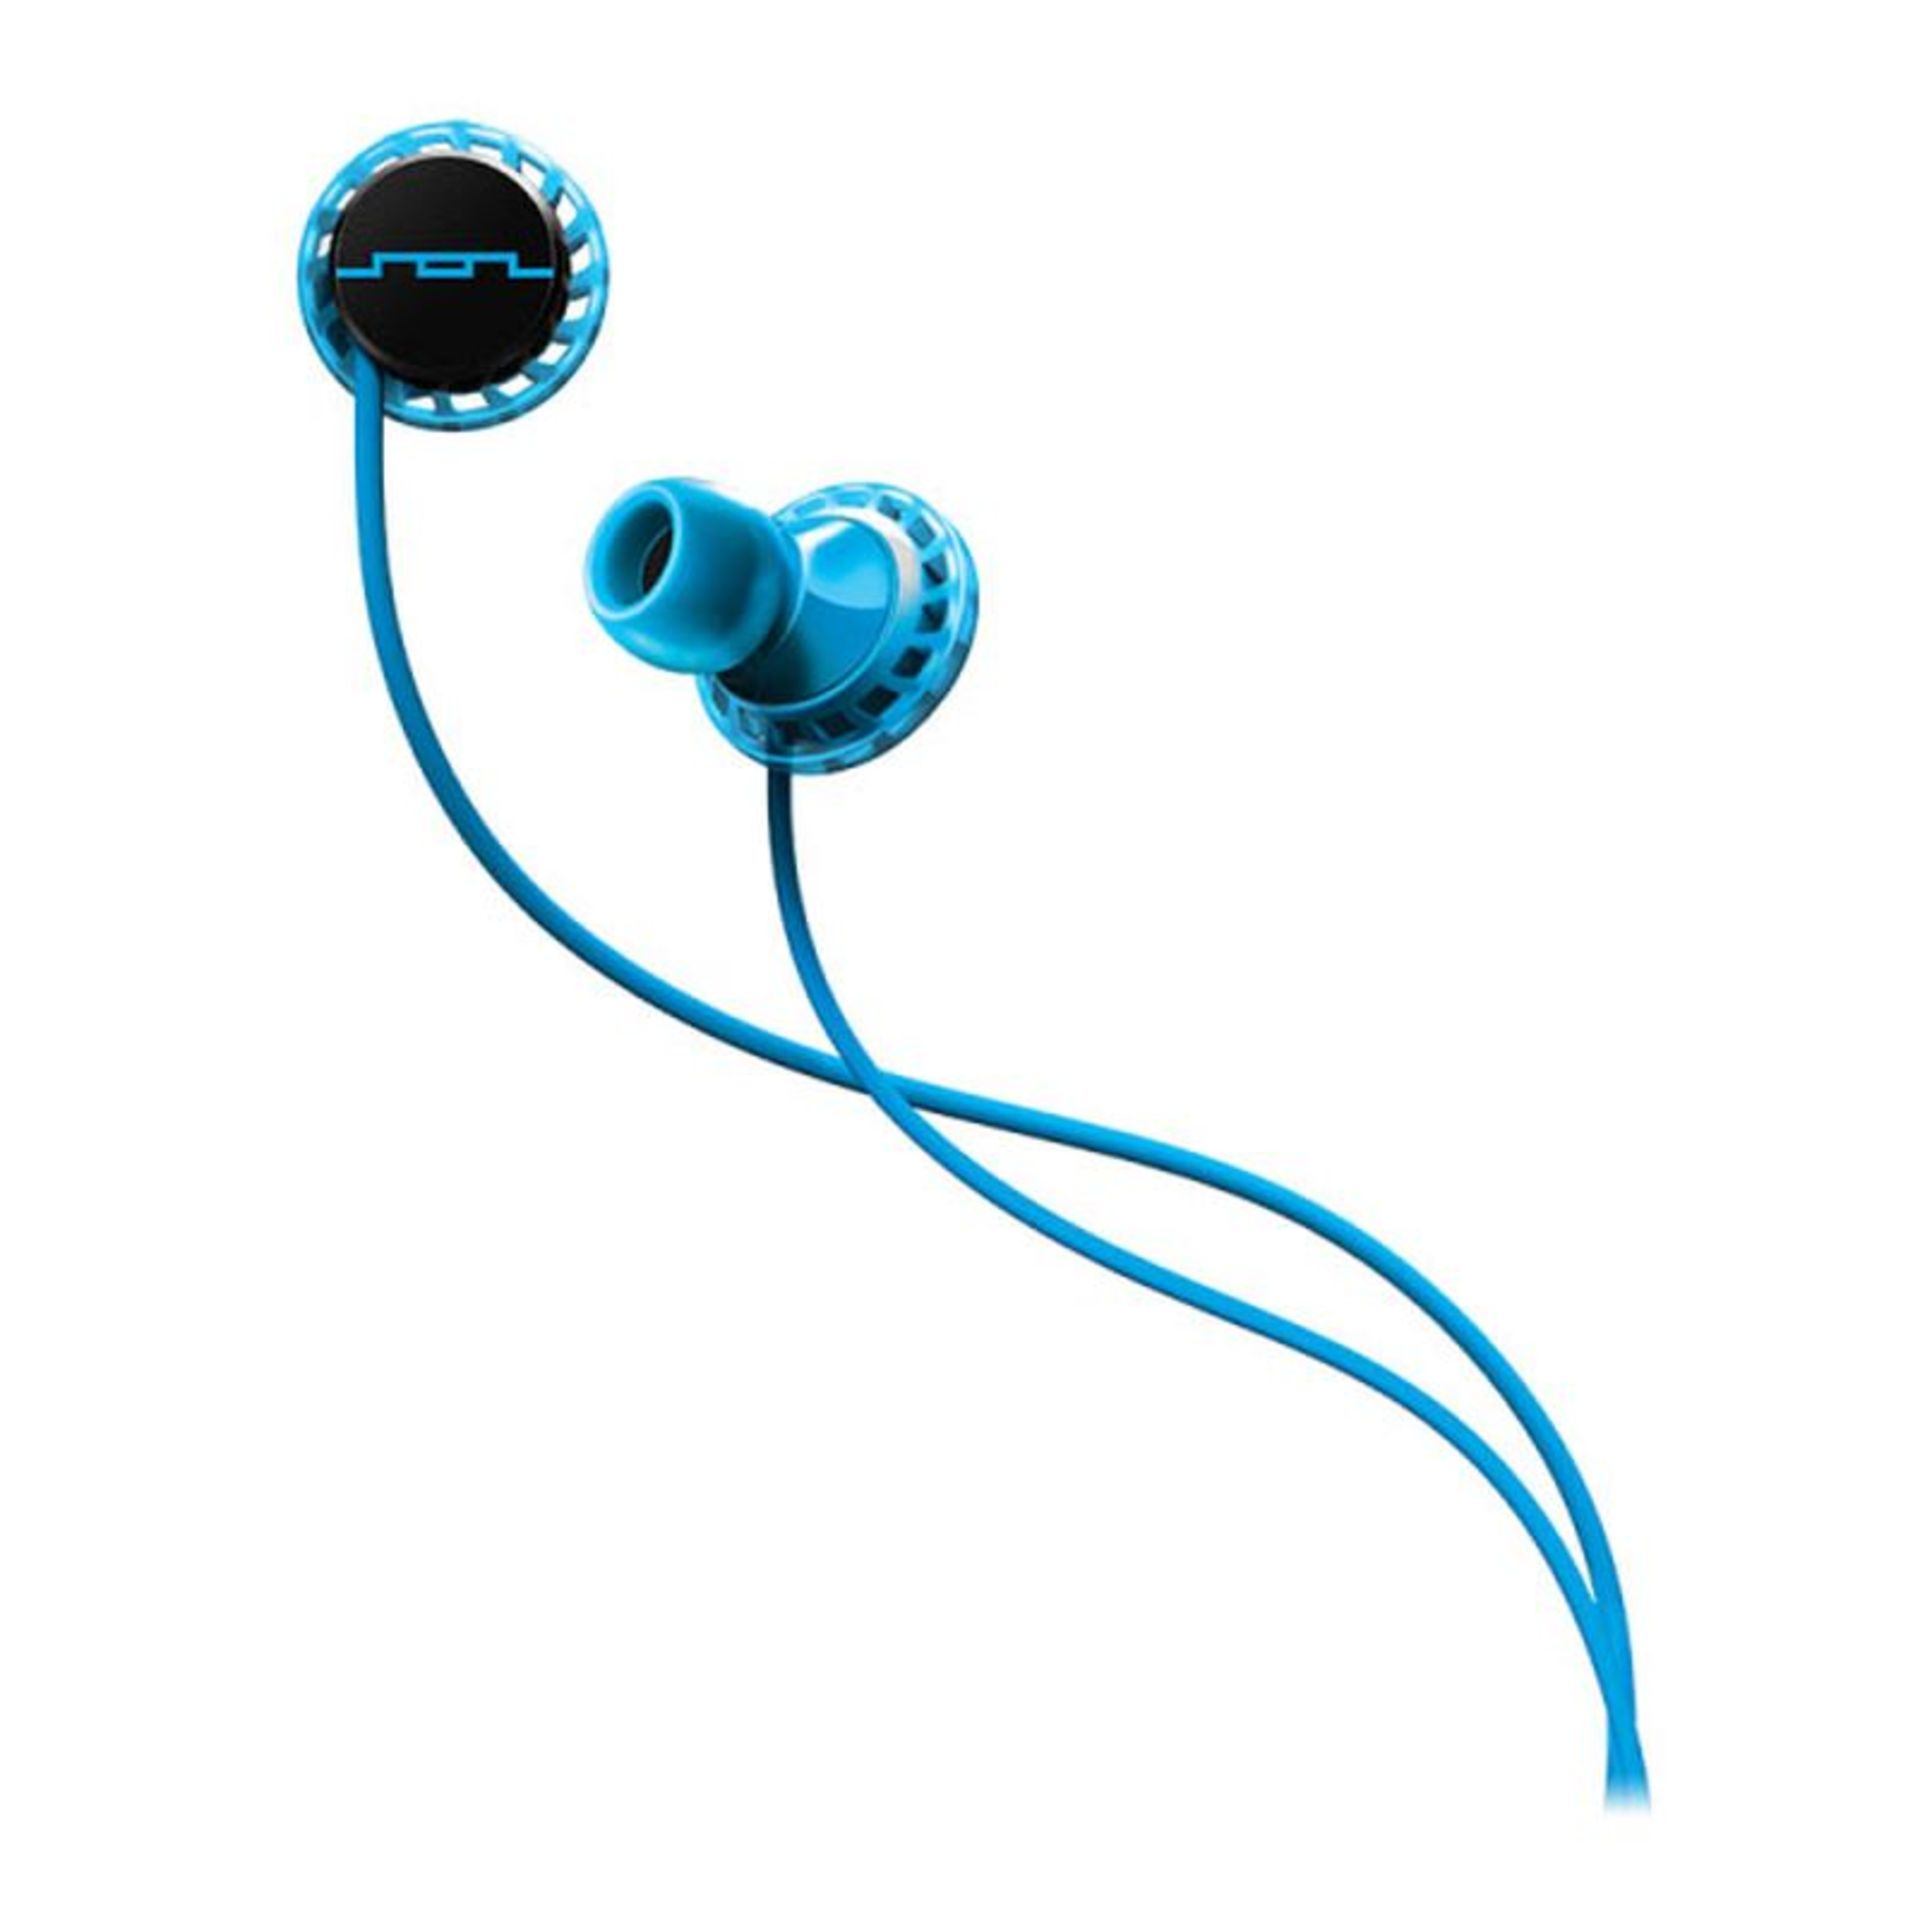 V Brand New Sol Republic Relays Sport In-Ear Headphones With 1 Button Remote Control - Mic and Music